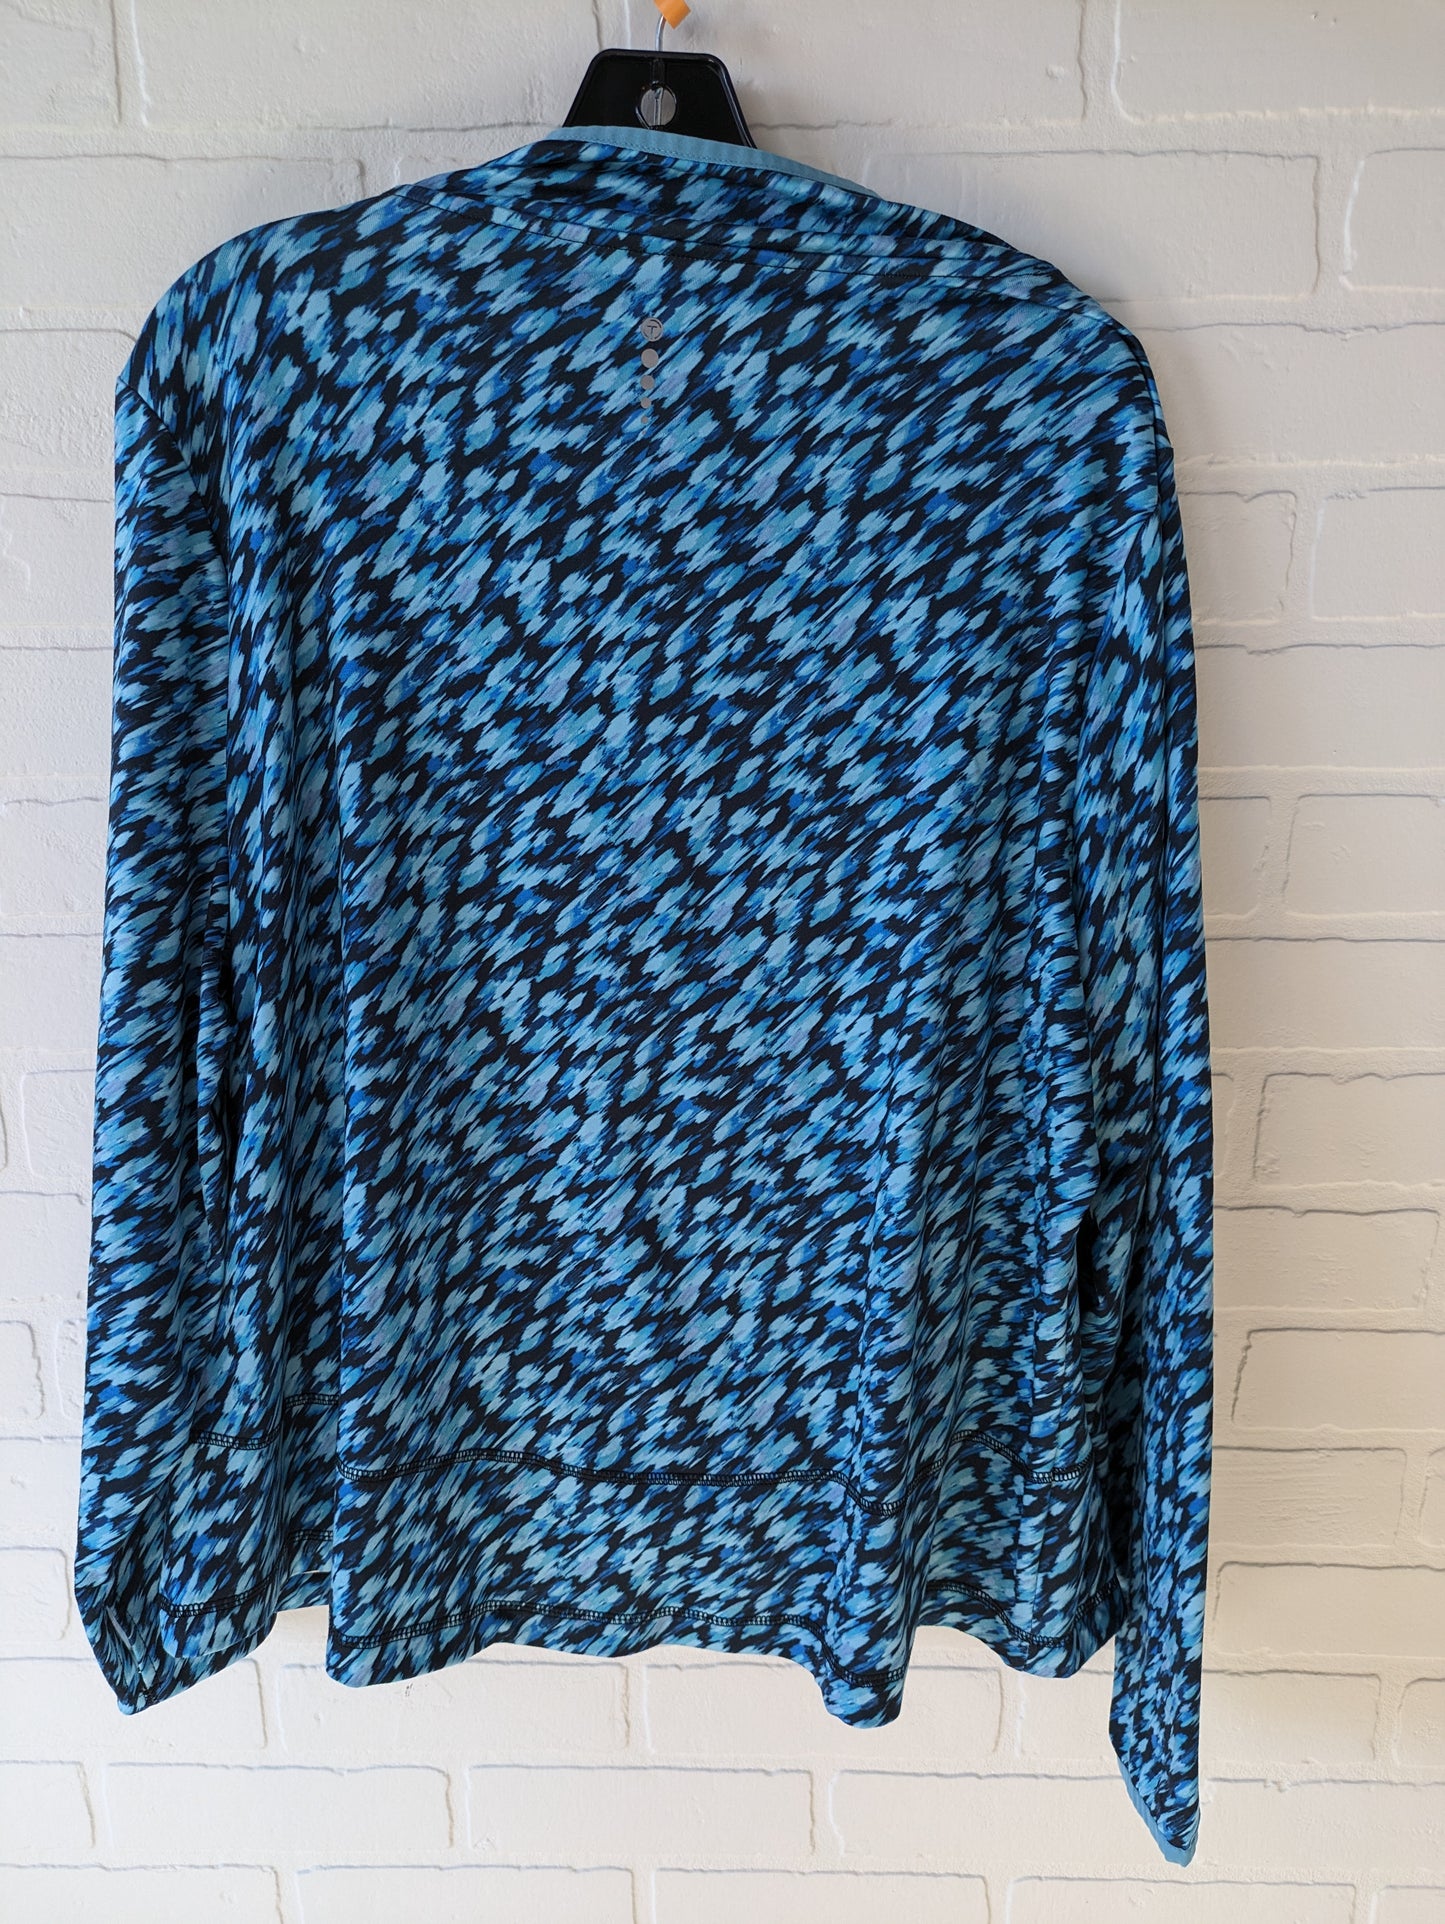 Athletic Top Long Sleeve Crewneck By Talbots  Size: 2x